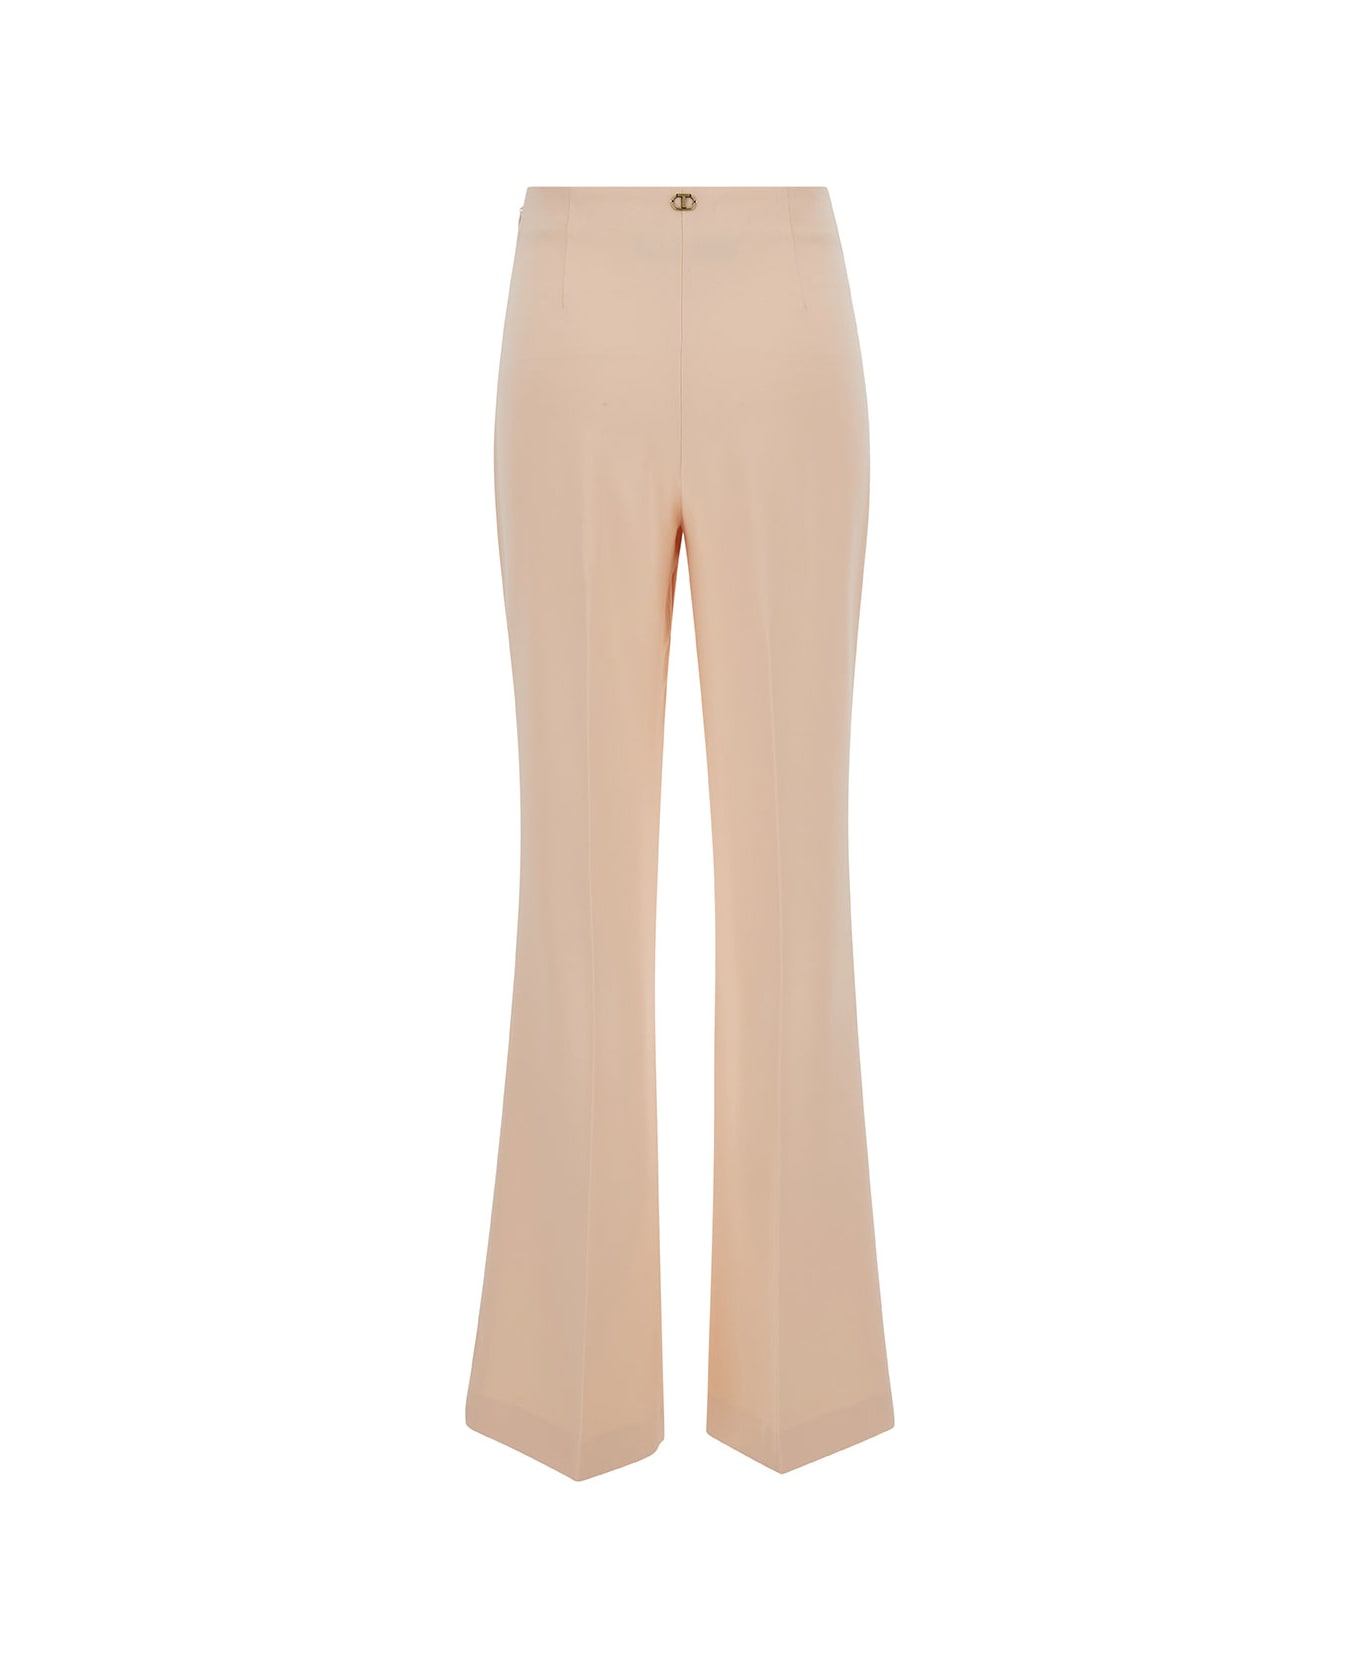 TwinSet Trousers - Cupcake Pink